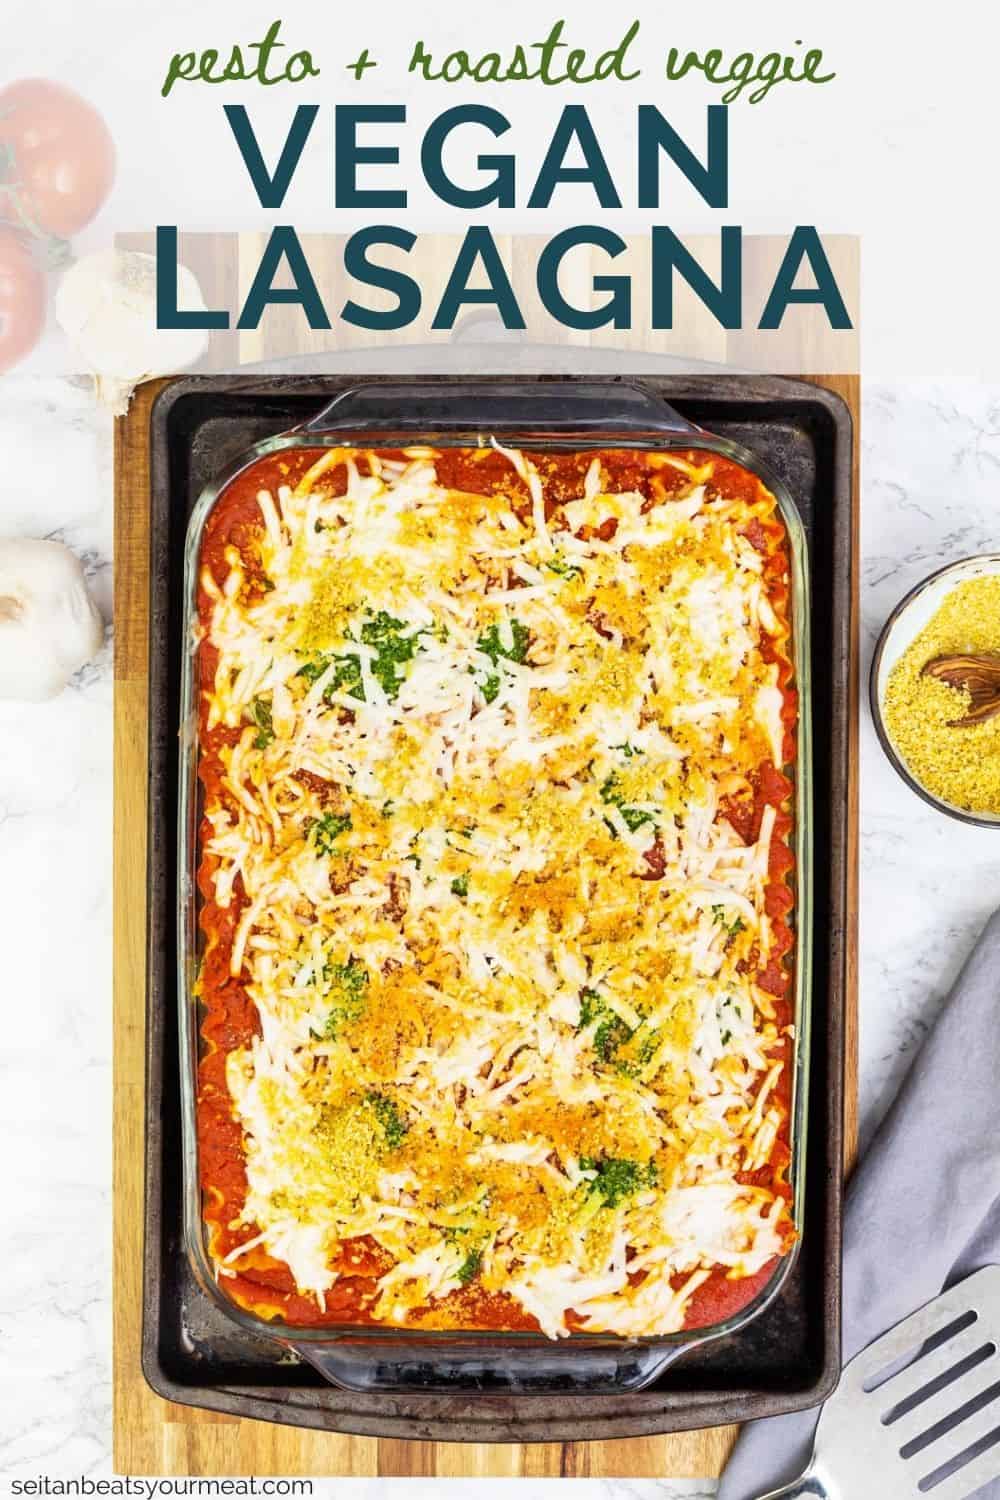 Tray of vegan lasagna on cutting board surrounded by ingredients with text "Pesto + Roasted Veggie Vegan Lasagna"